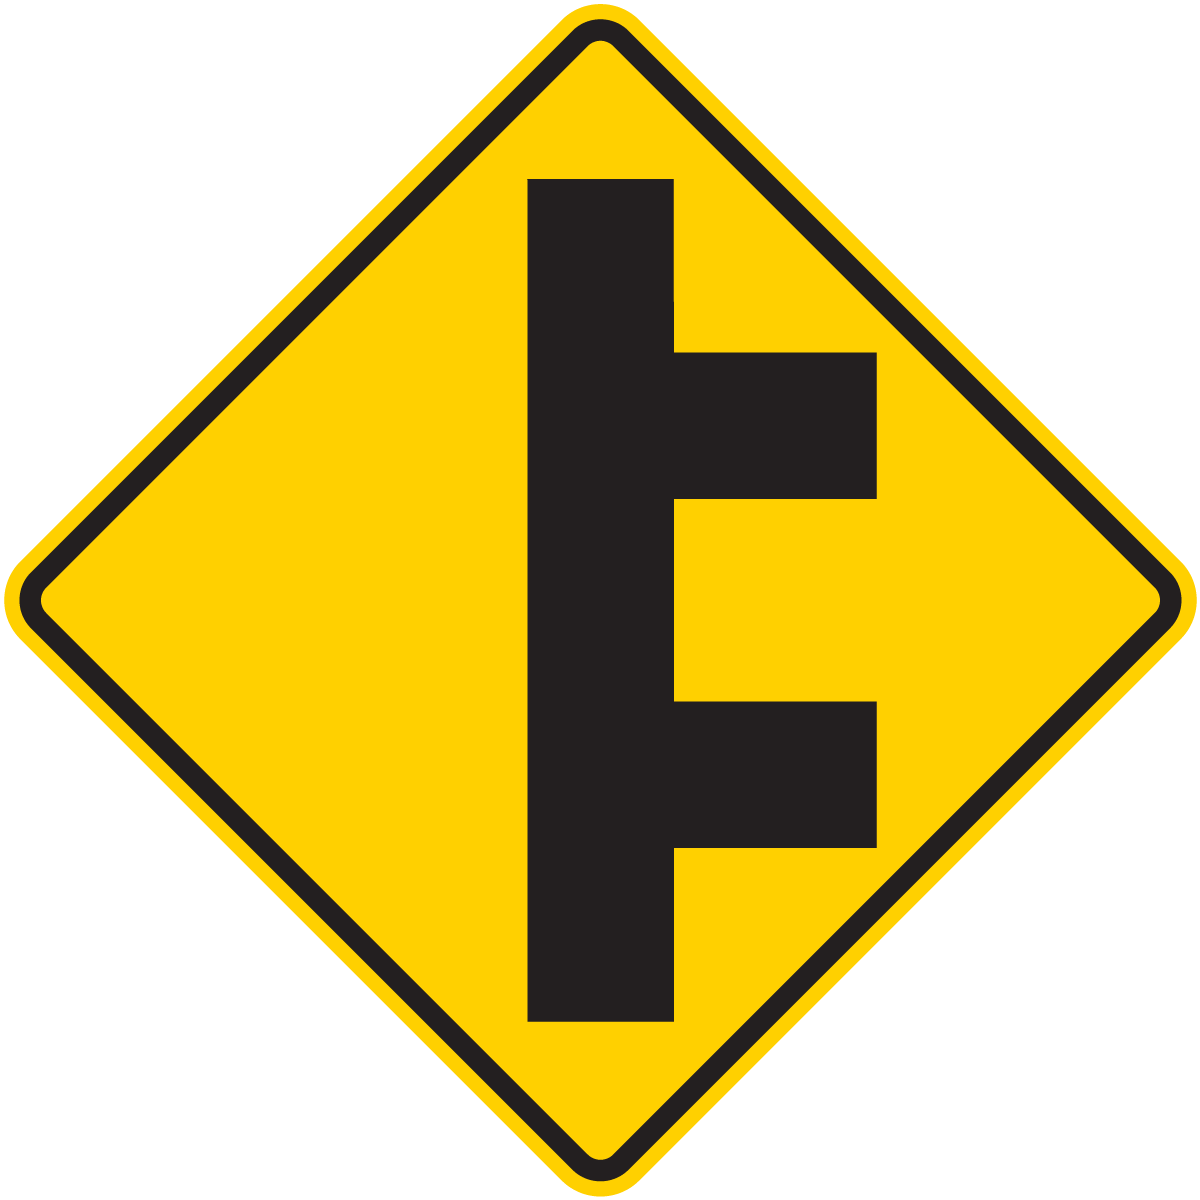 W2-8 Double Side Road Intersection (Left or Right)